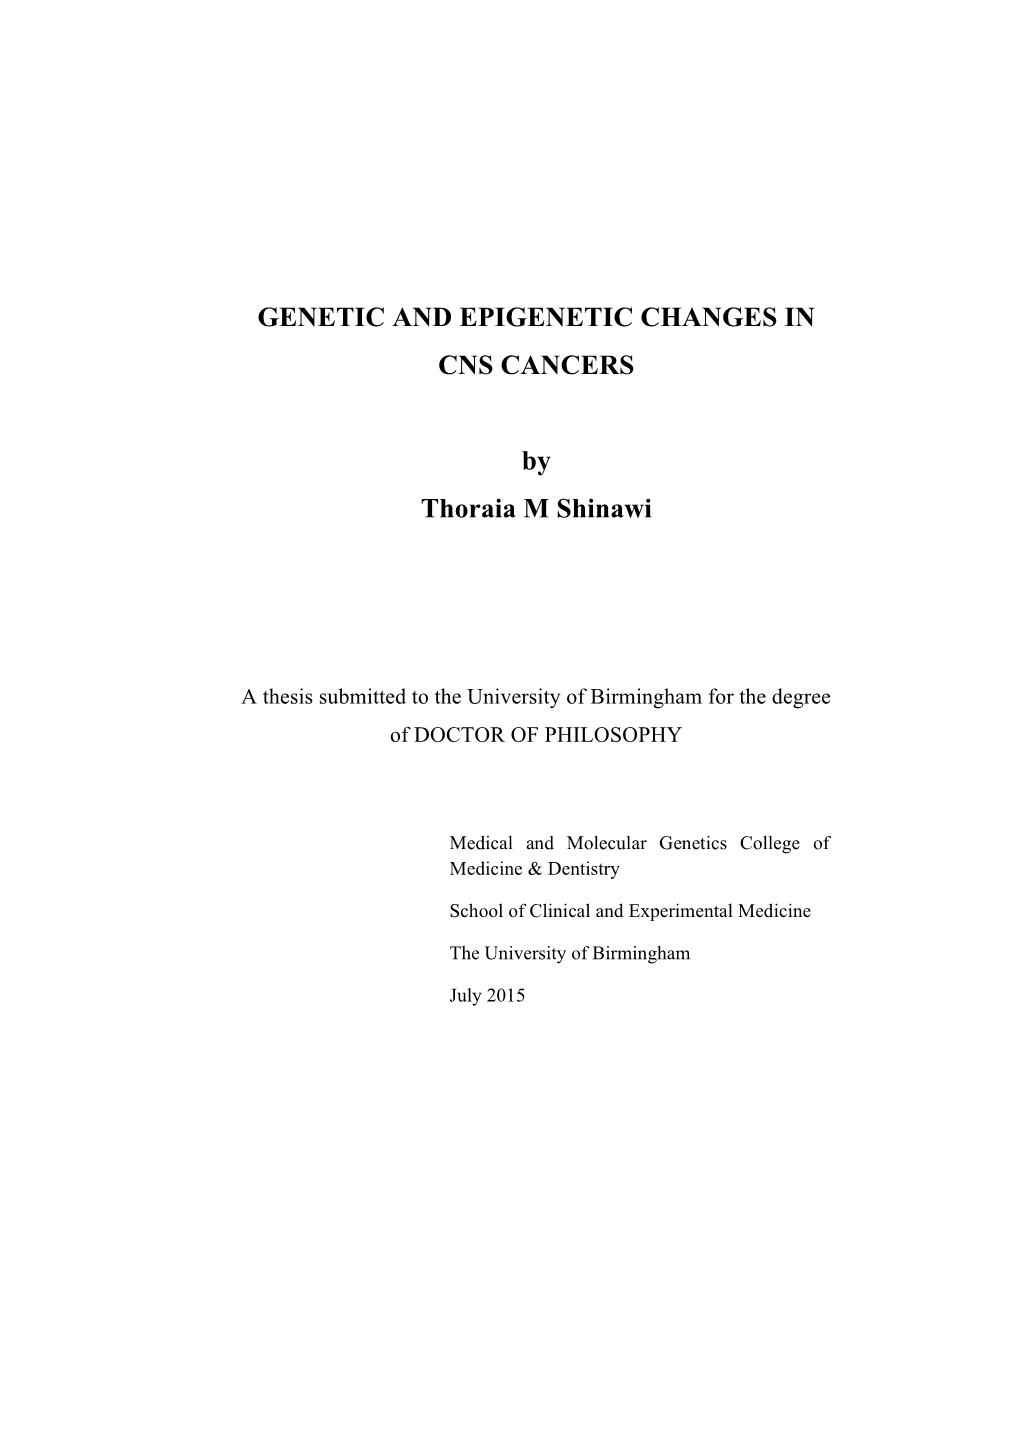 Genetic and Epigenetic Changes in Cns Cancers